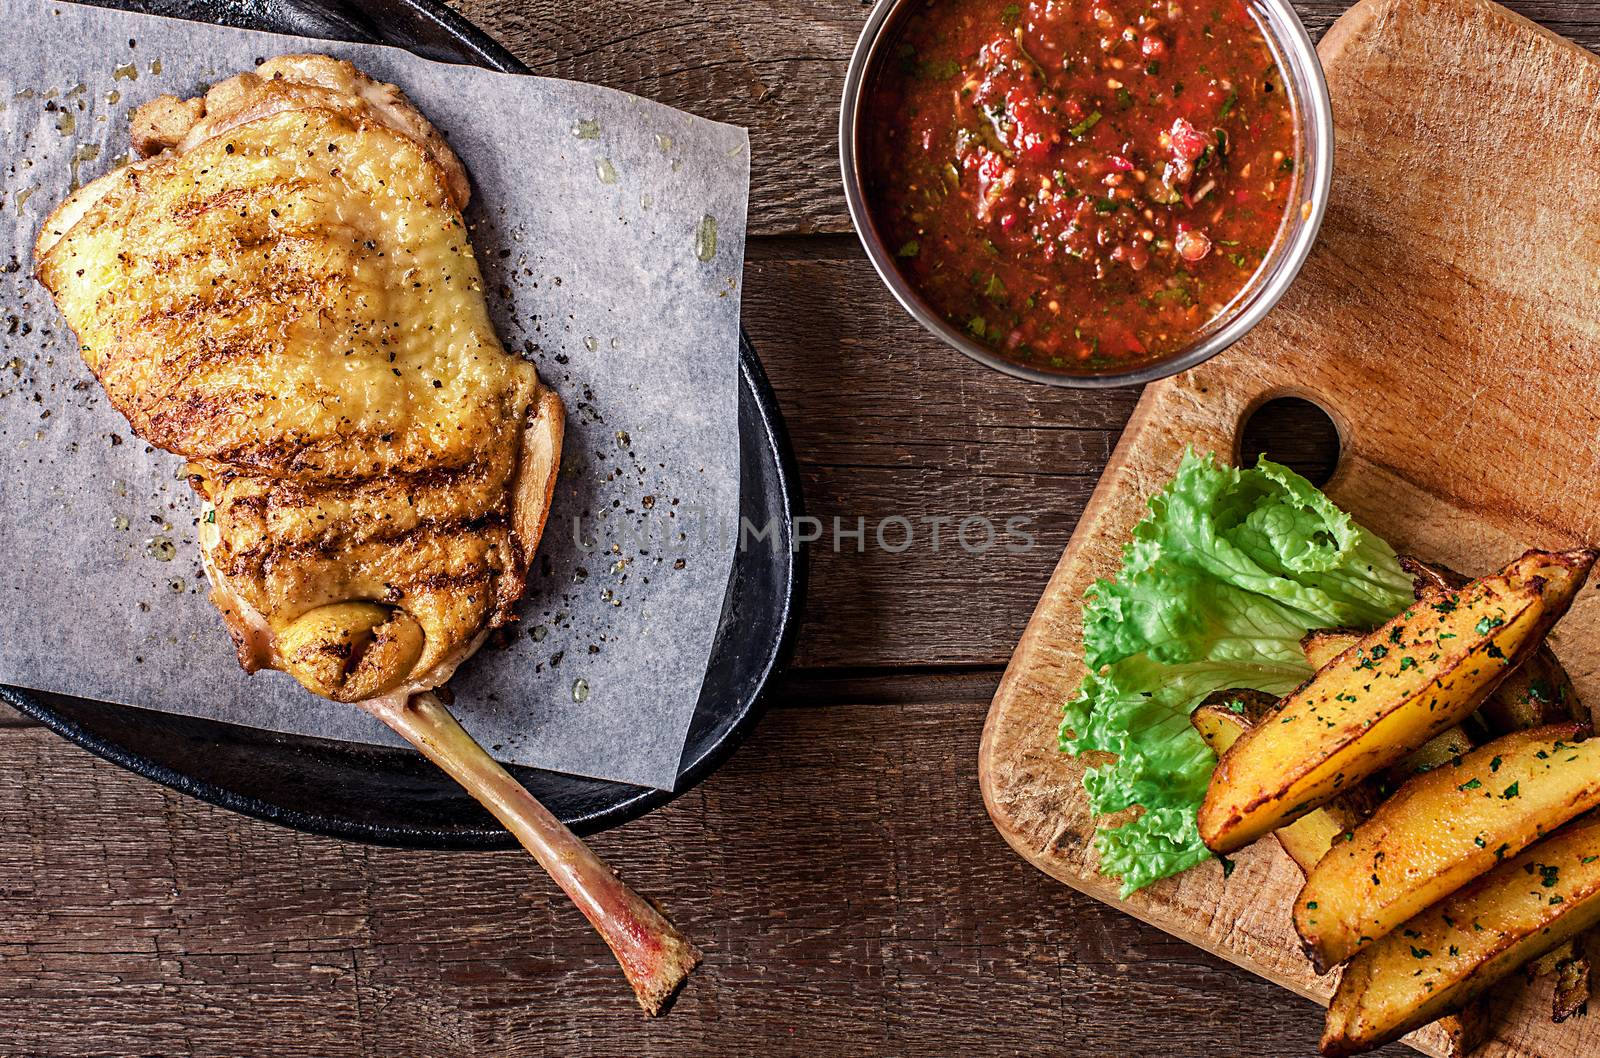 Fried chicken meat on the bone, red sauce, potato wedges, lettuce on background wooden table